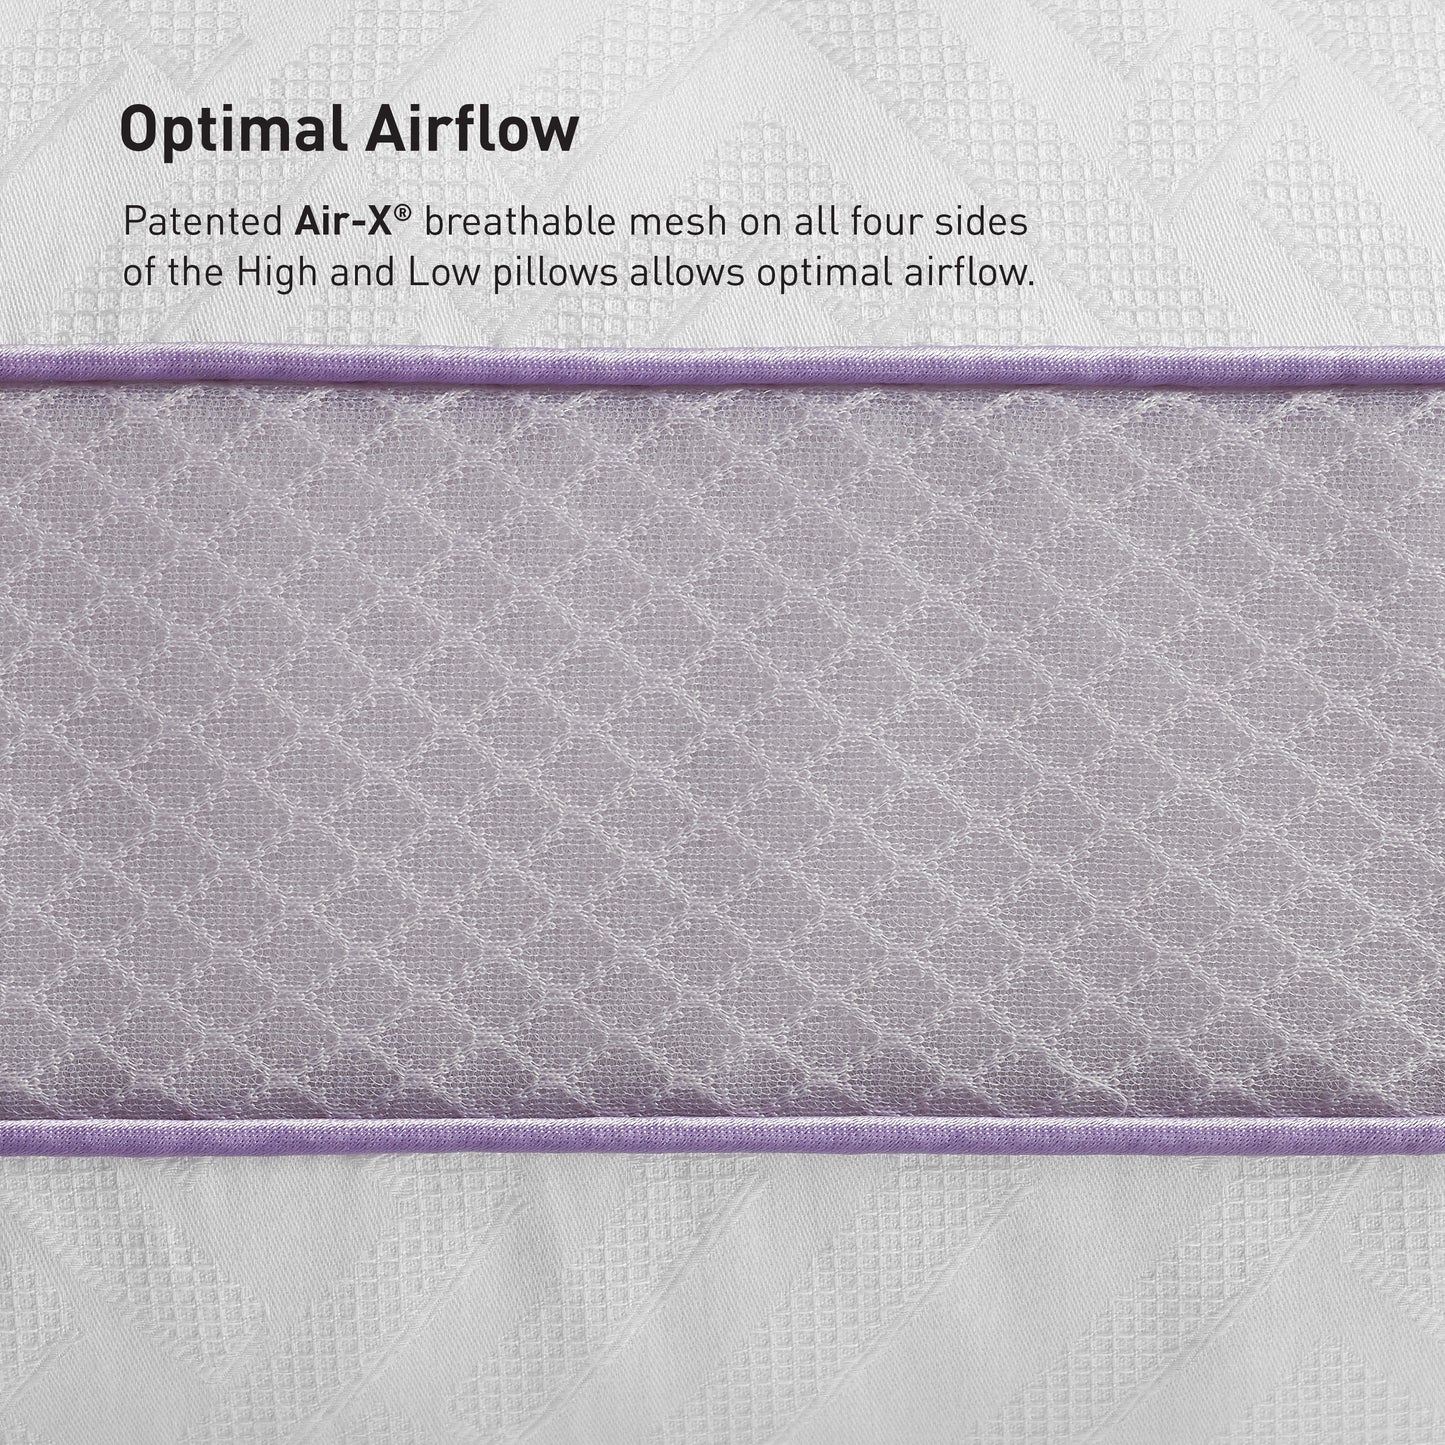 Bedgear High-Low Performance Pillow - Image 7